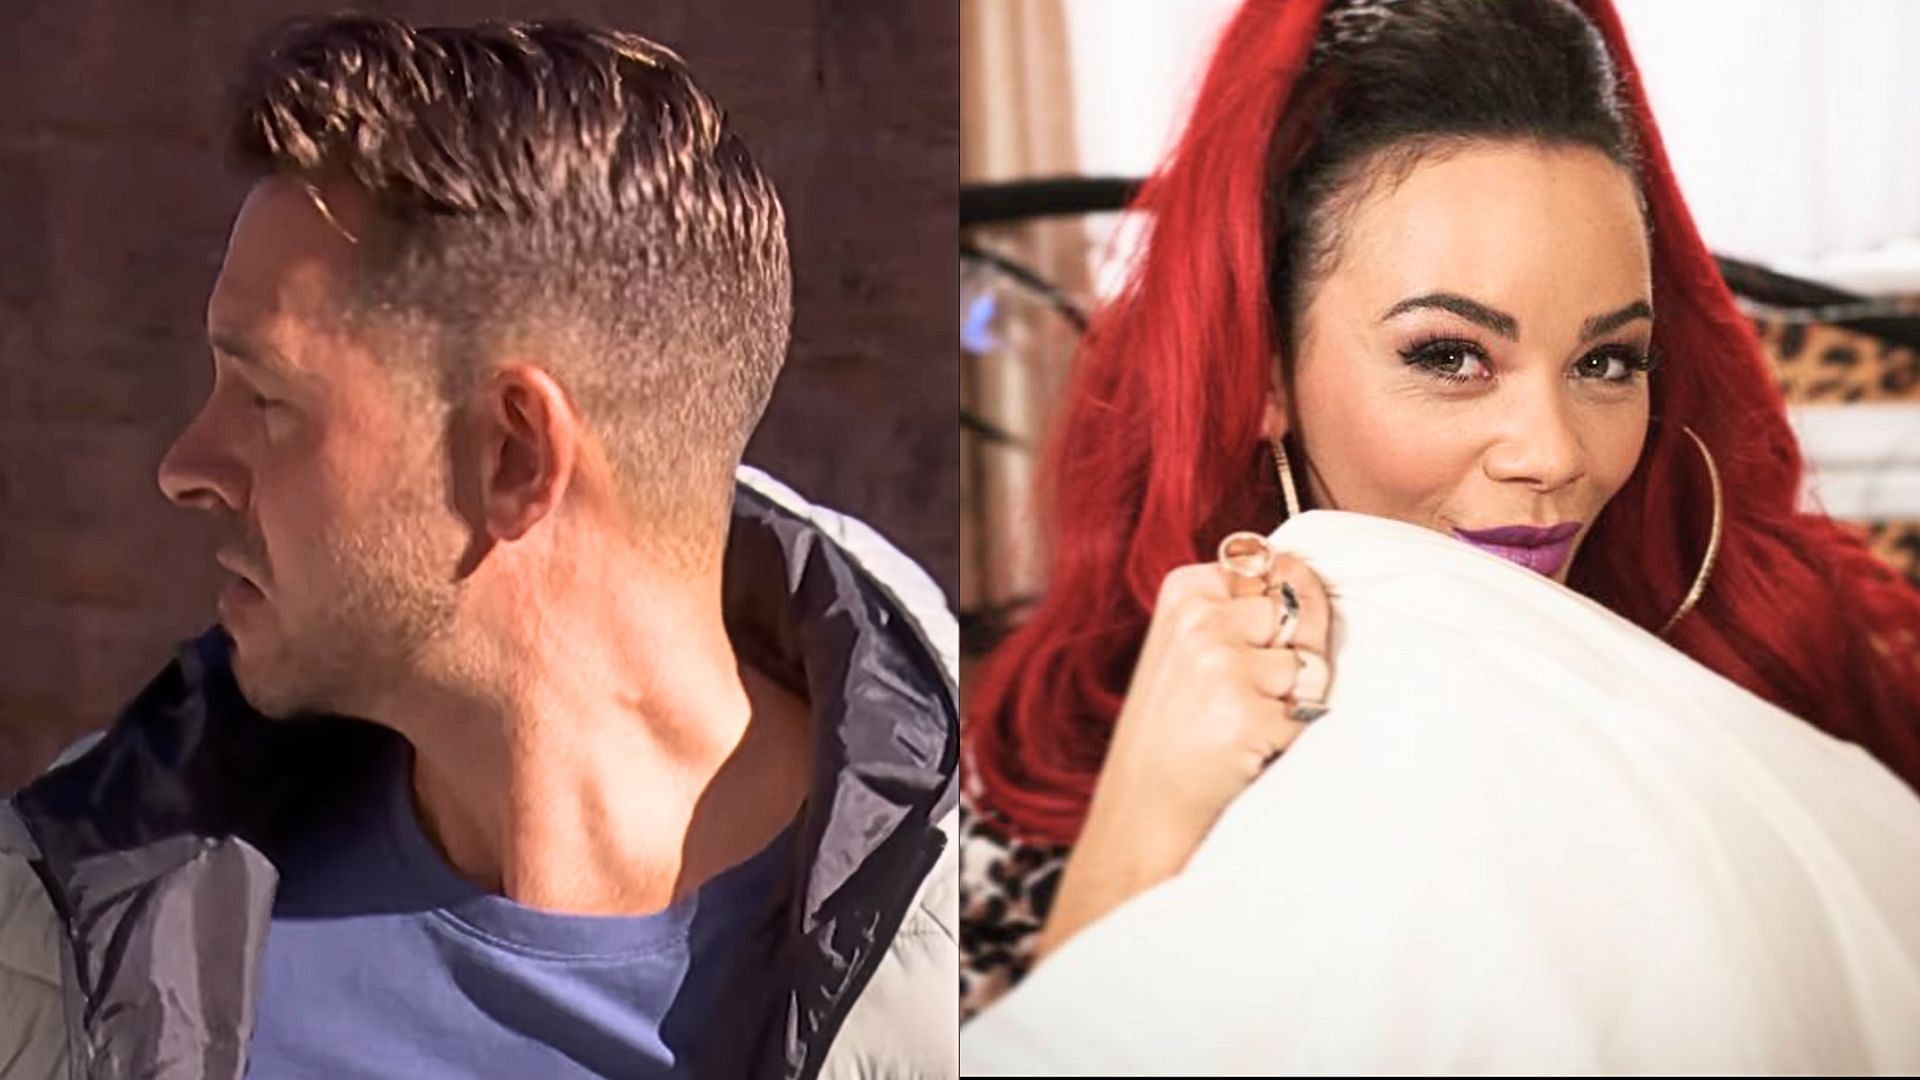 Darren (left) and Goldie (right) lead the drama in the coming week on Hollyoaks (Images via Instagram)